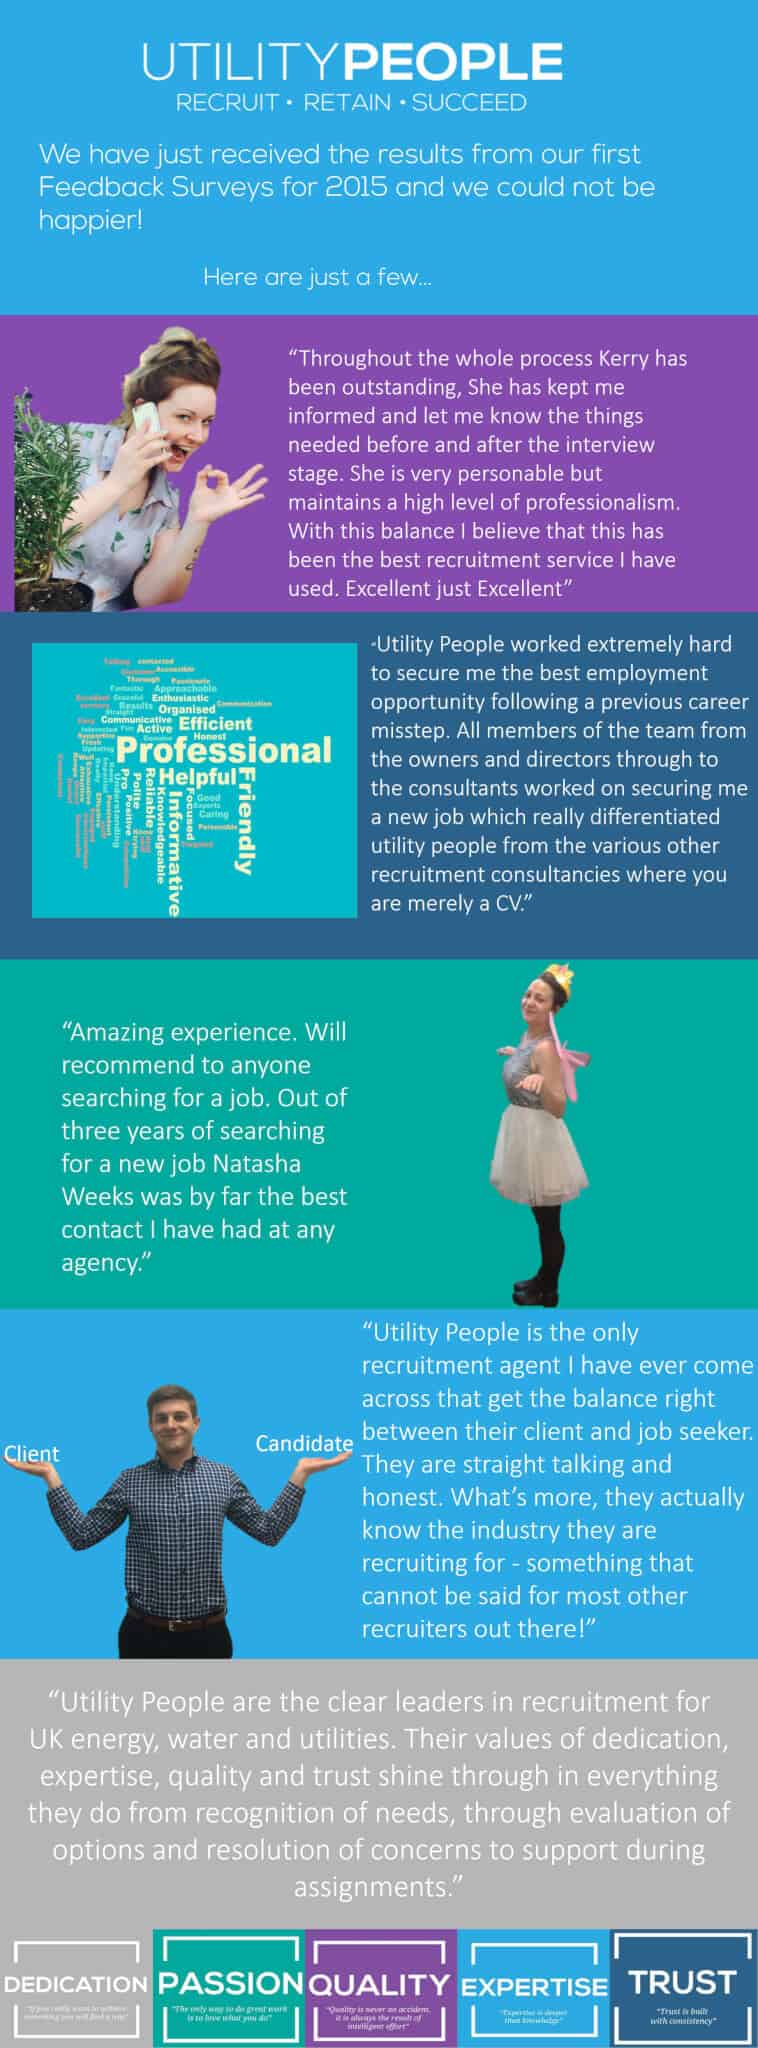 Our Feedback says it all! Utility People's Facebook Survey 2015